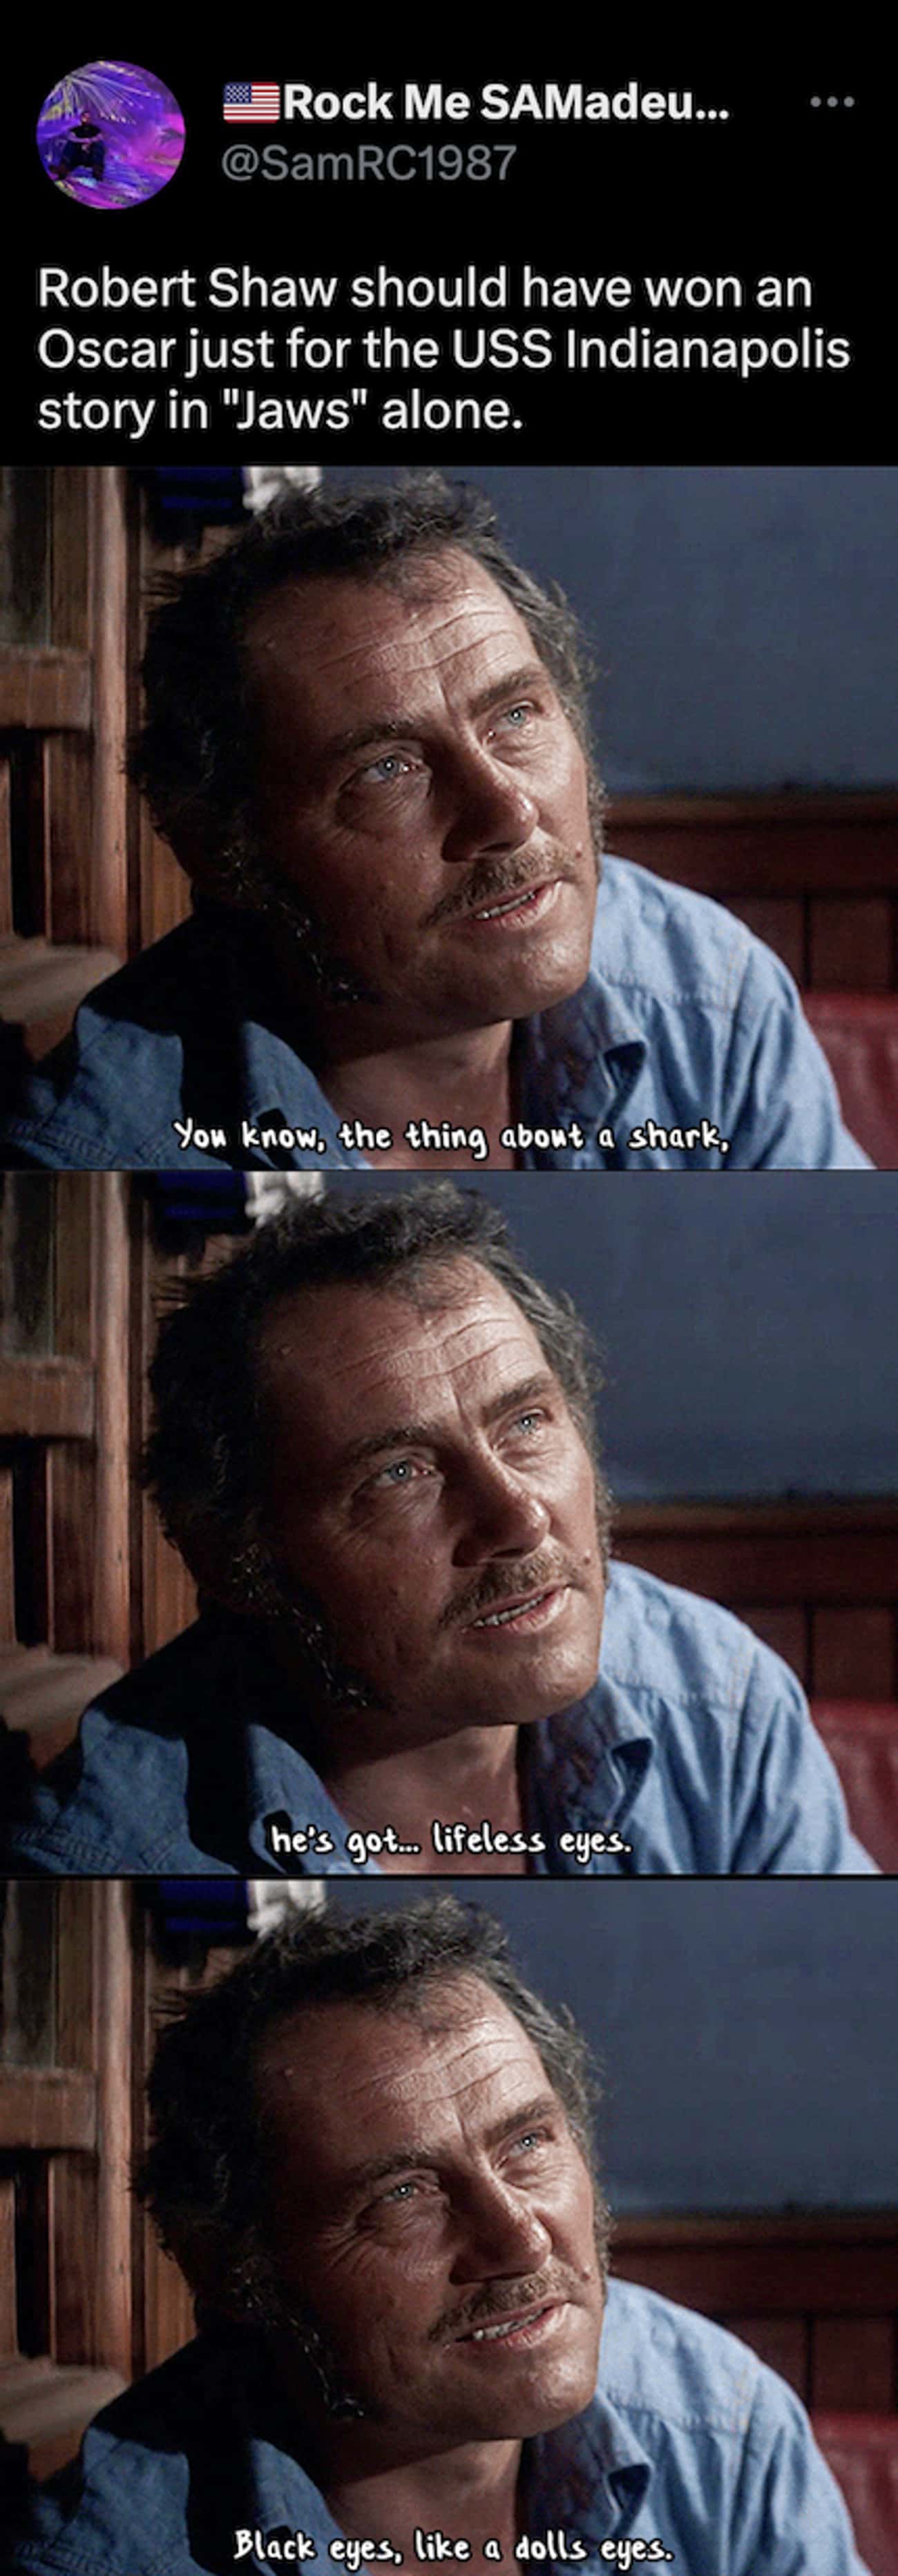 Robert Shaw In 'Jaws'